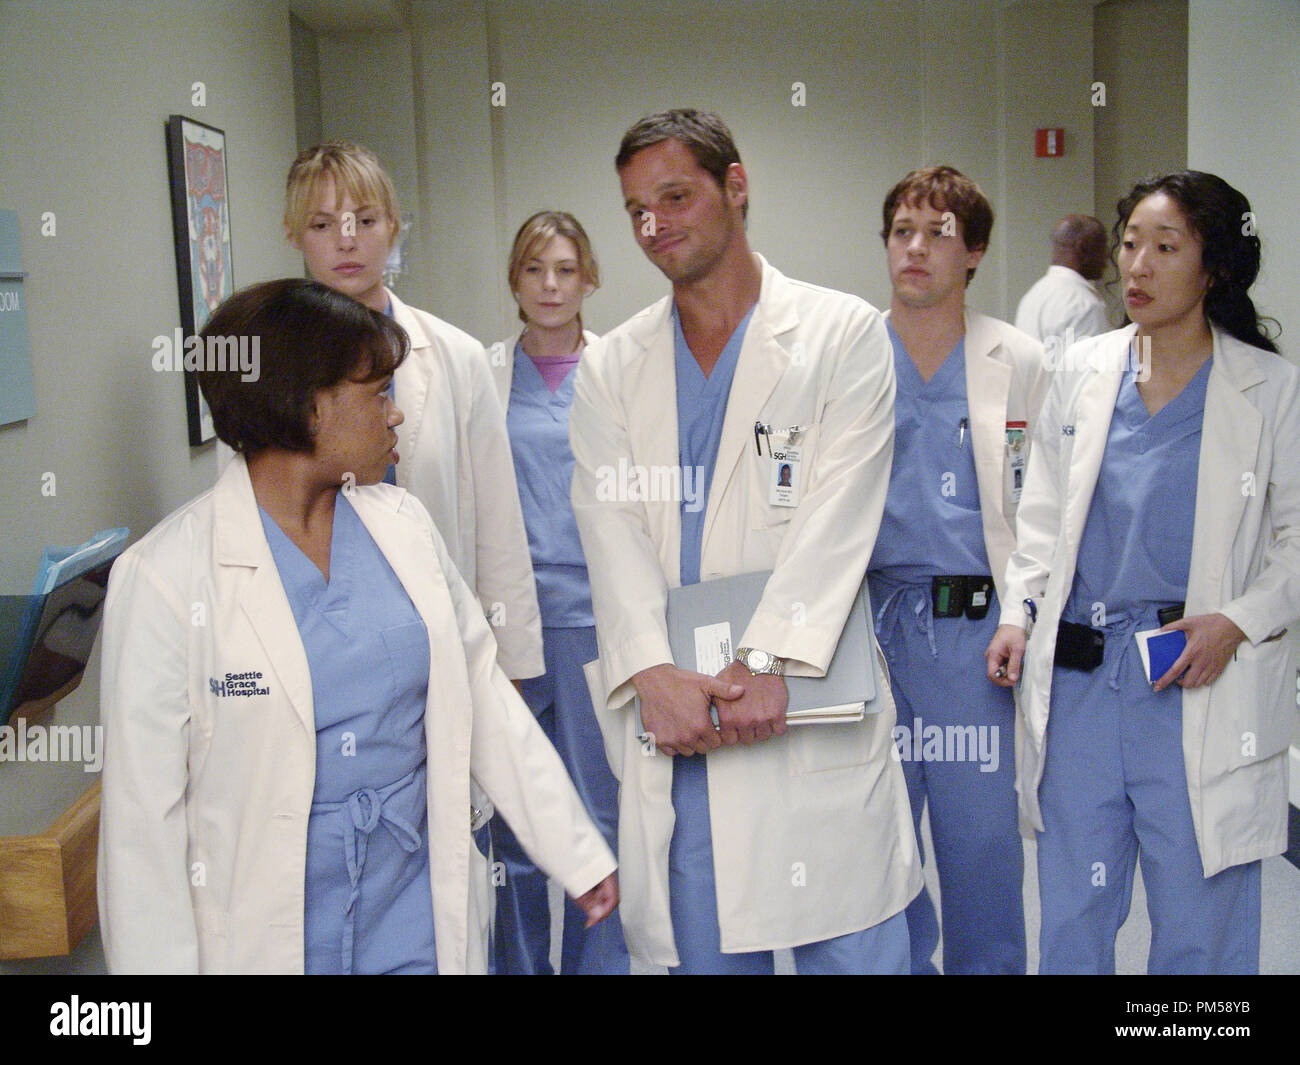 Studio Publicity Still from 'Grey's Anatomy' Chandra Wilson, Katherine Heigl, Ellen Pompeo, Justin Chambers, T.R. Knight, Sandra Oh 2005 Photo by Danny Feld   File Reference # 307362005THA  For Editorial Use Only -  All Rights Reserved Stock Photo